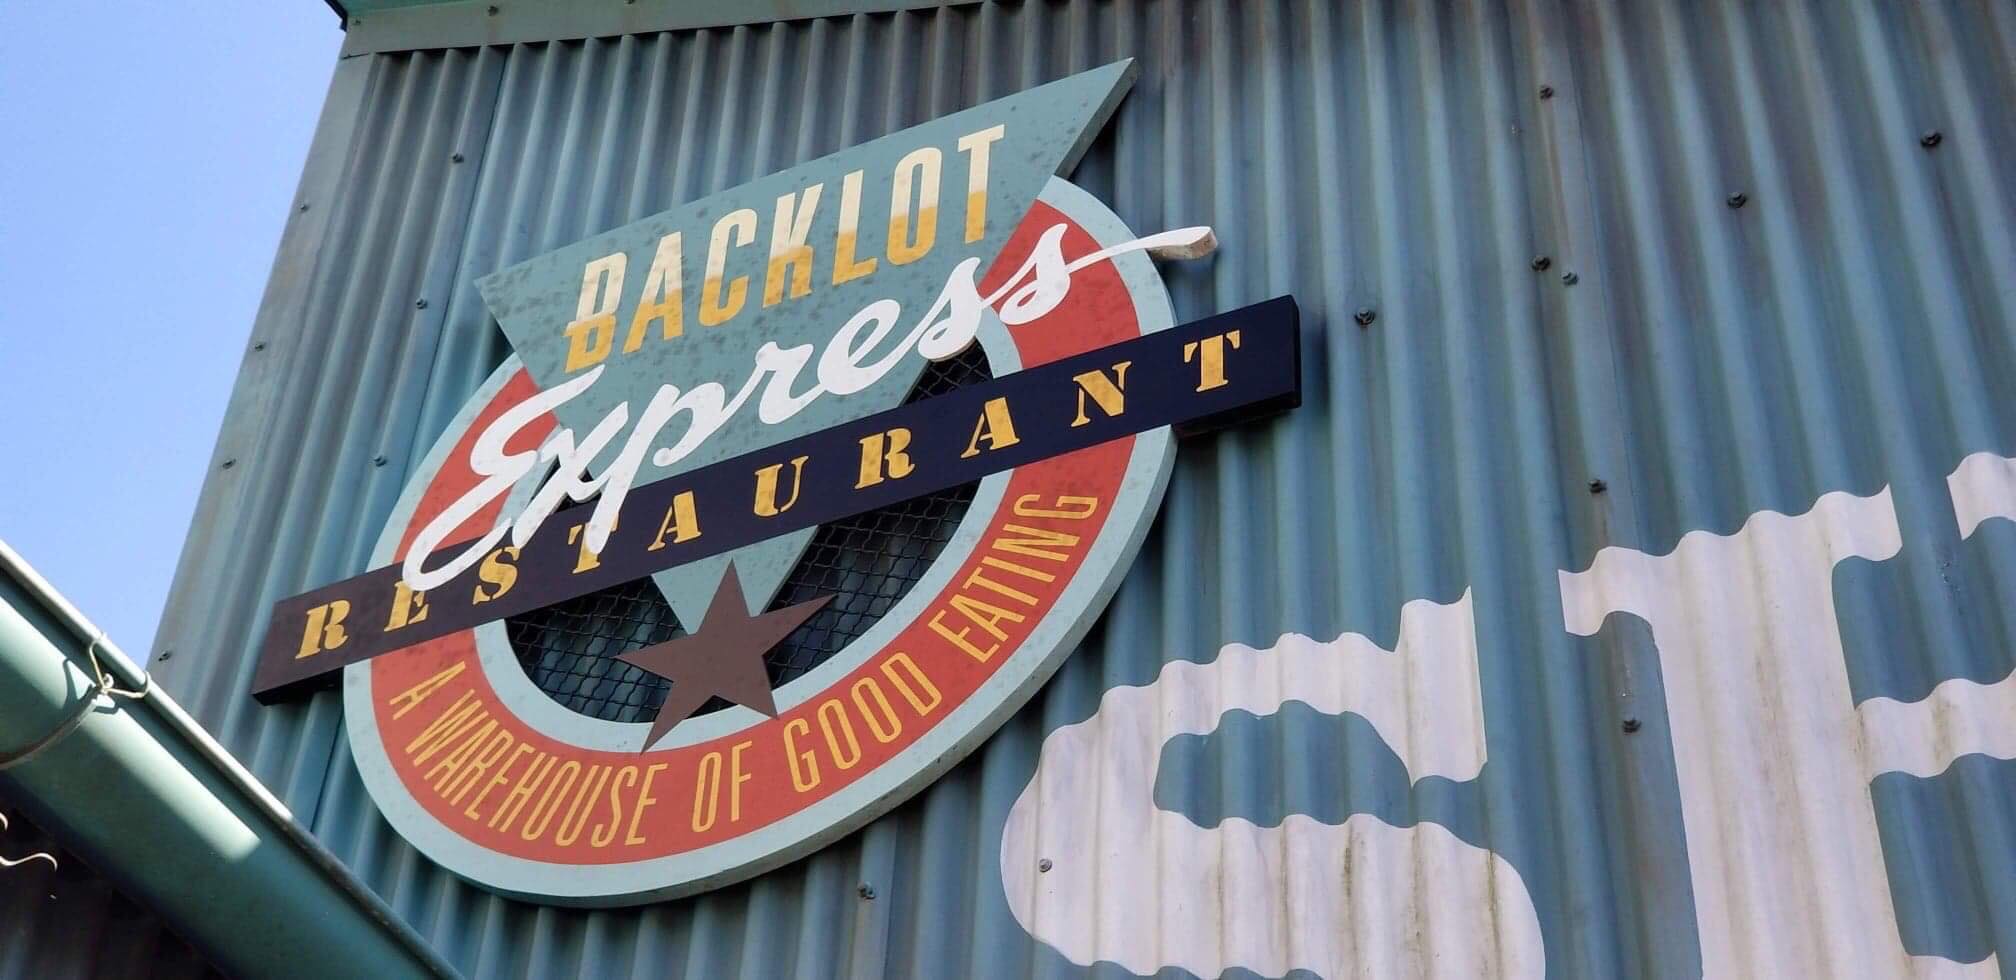 New Menu Coming To Backlot Express In Preparation Of Galaxy’s Edge